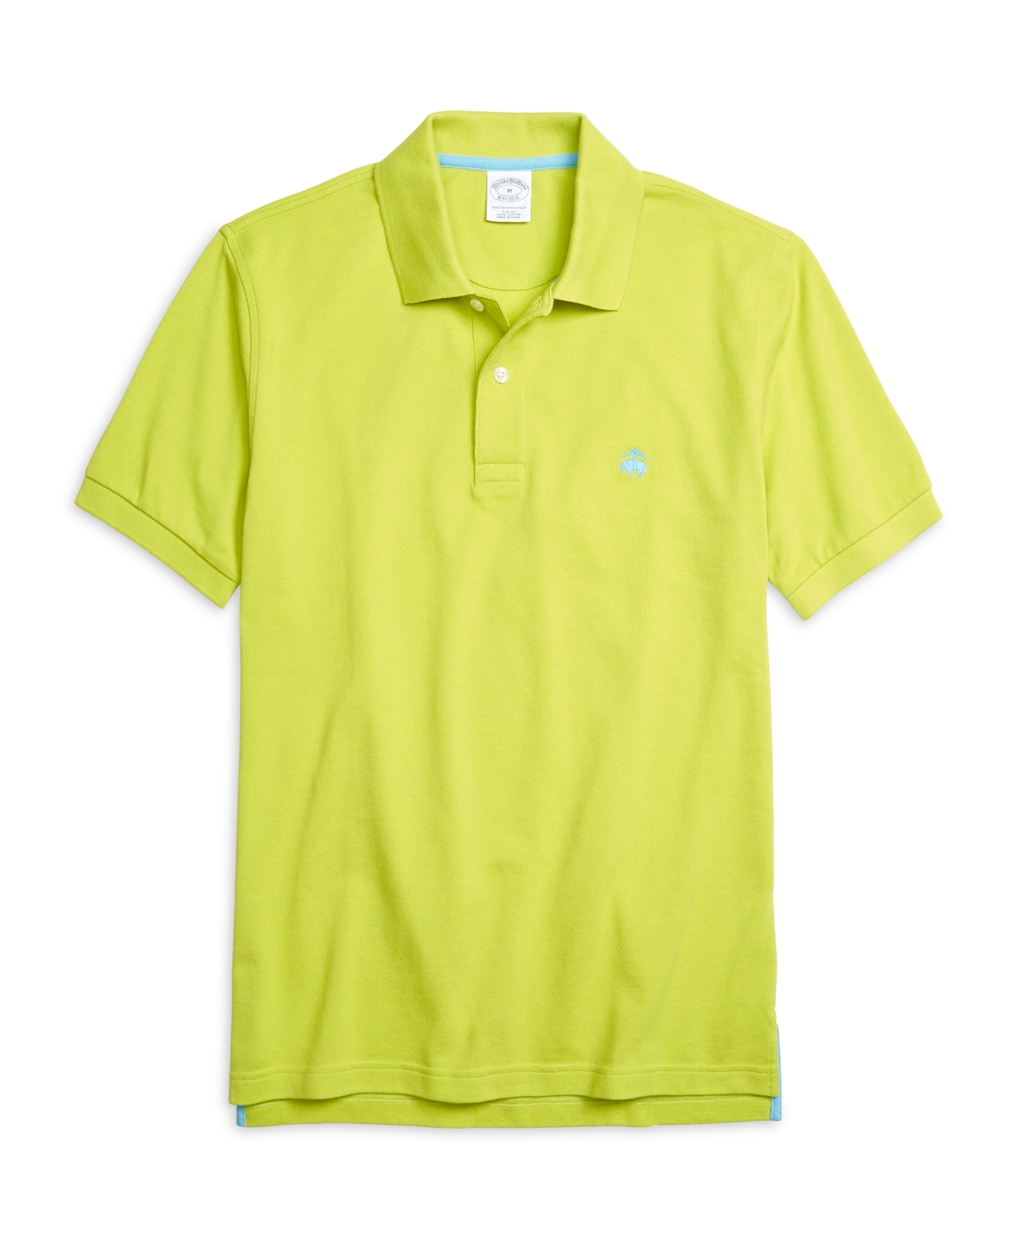 Brooks brothers Golden Fleece® Slim Fit Performance Polo Shirt in Green ...